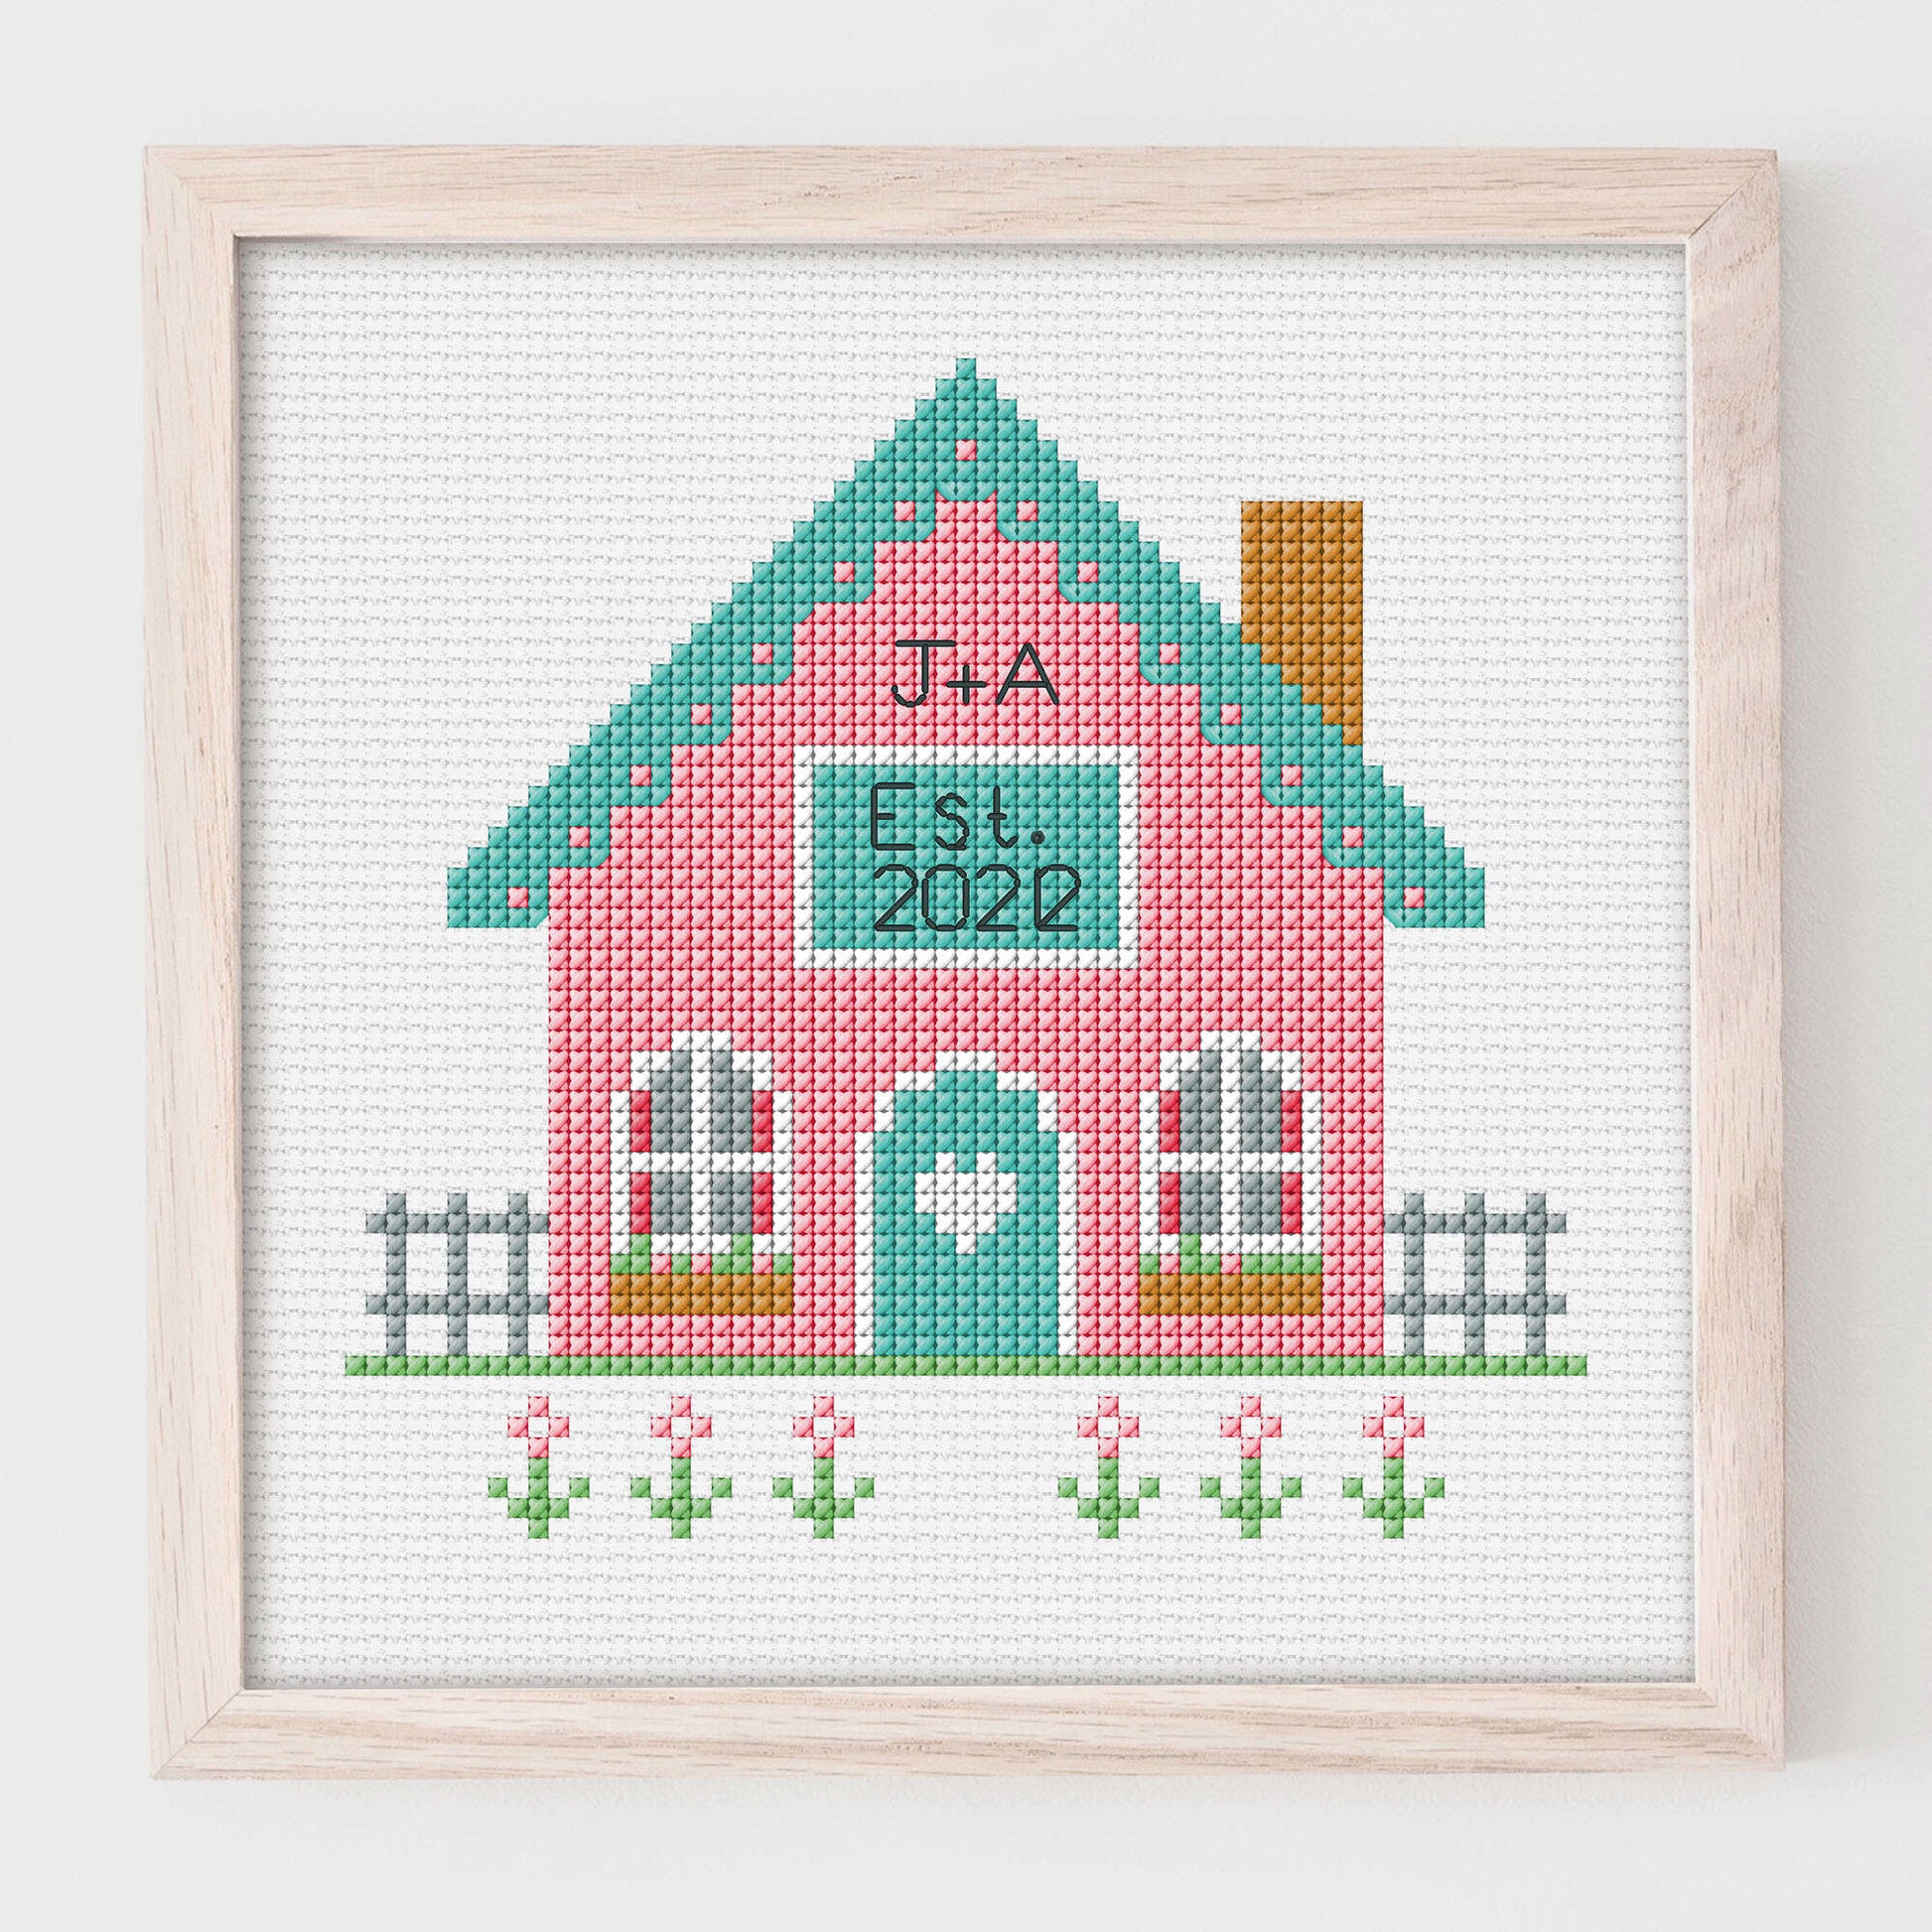 Free Anchor Embroidery New Home Cross Stitch Design Pattern